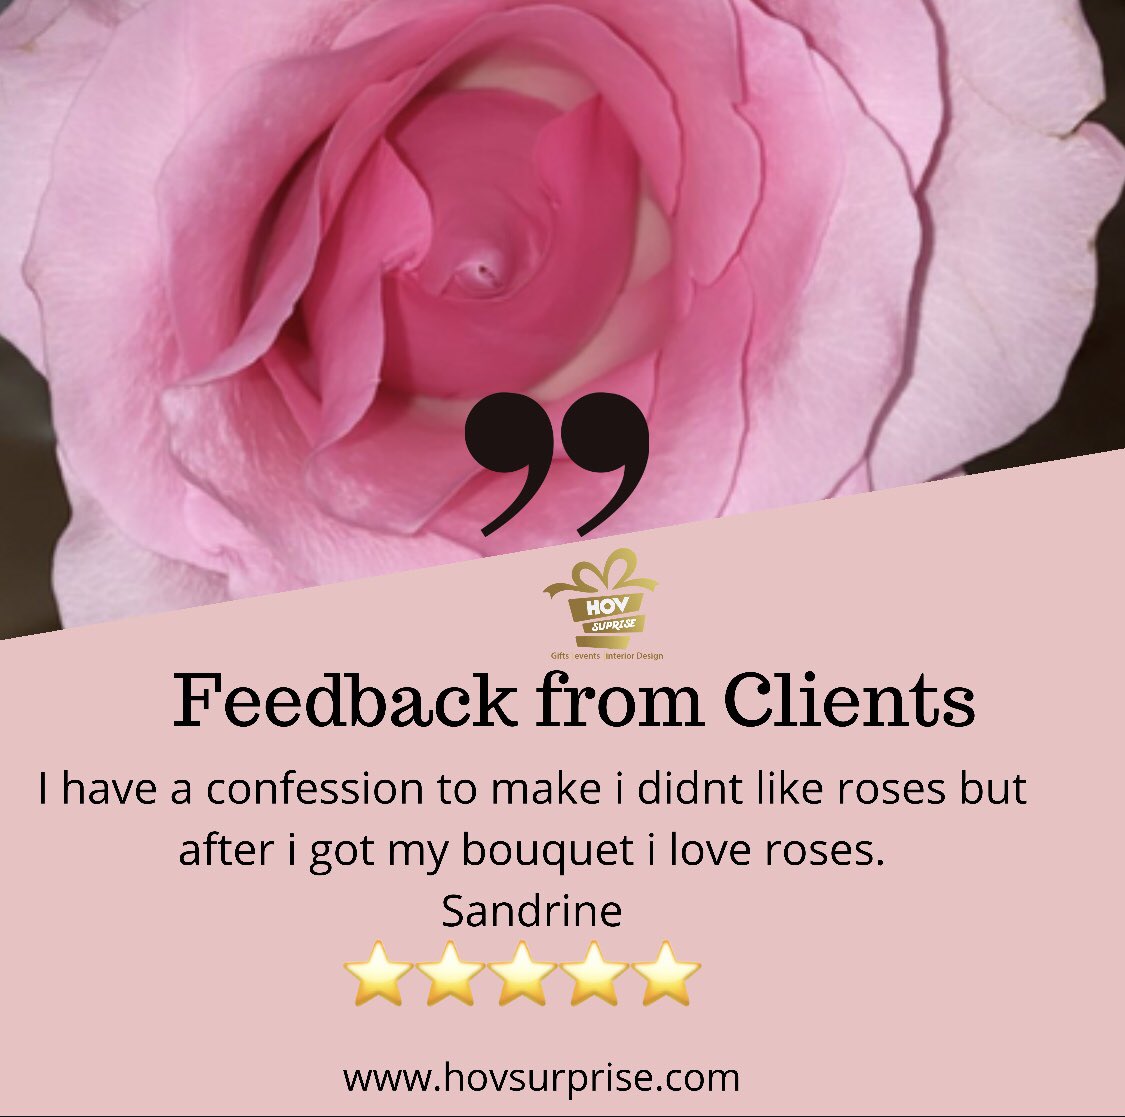 @hov_surprise 5Stars Reviews i love roses!!!!!!! If you have the zeal to make somebody happy, check out hovsurprise.com & order now!!! #reviews #hov_surprise #houseofversi #hovcitysales #herpotential #5starservice #5starreviews #stayhome #flowerbouquets #flowerslovers